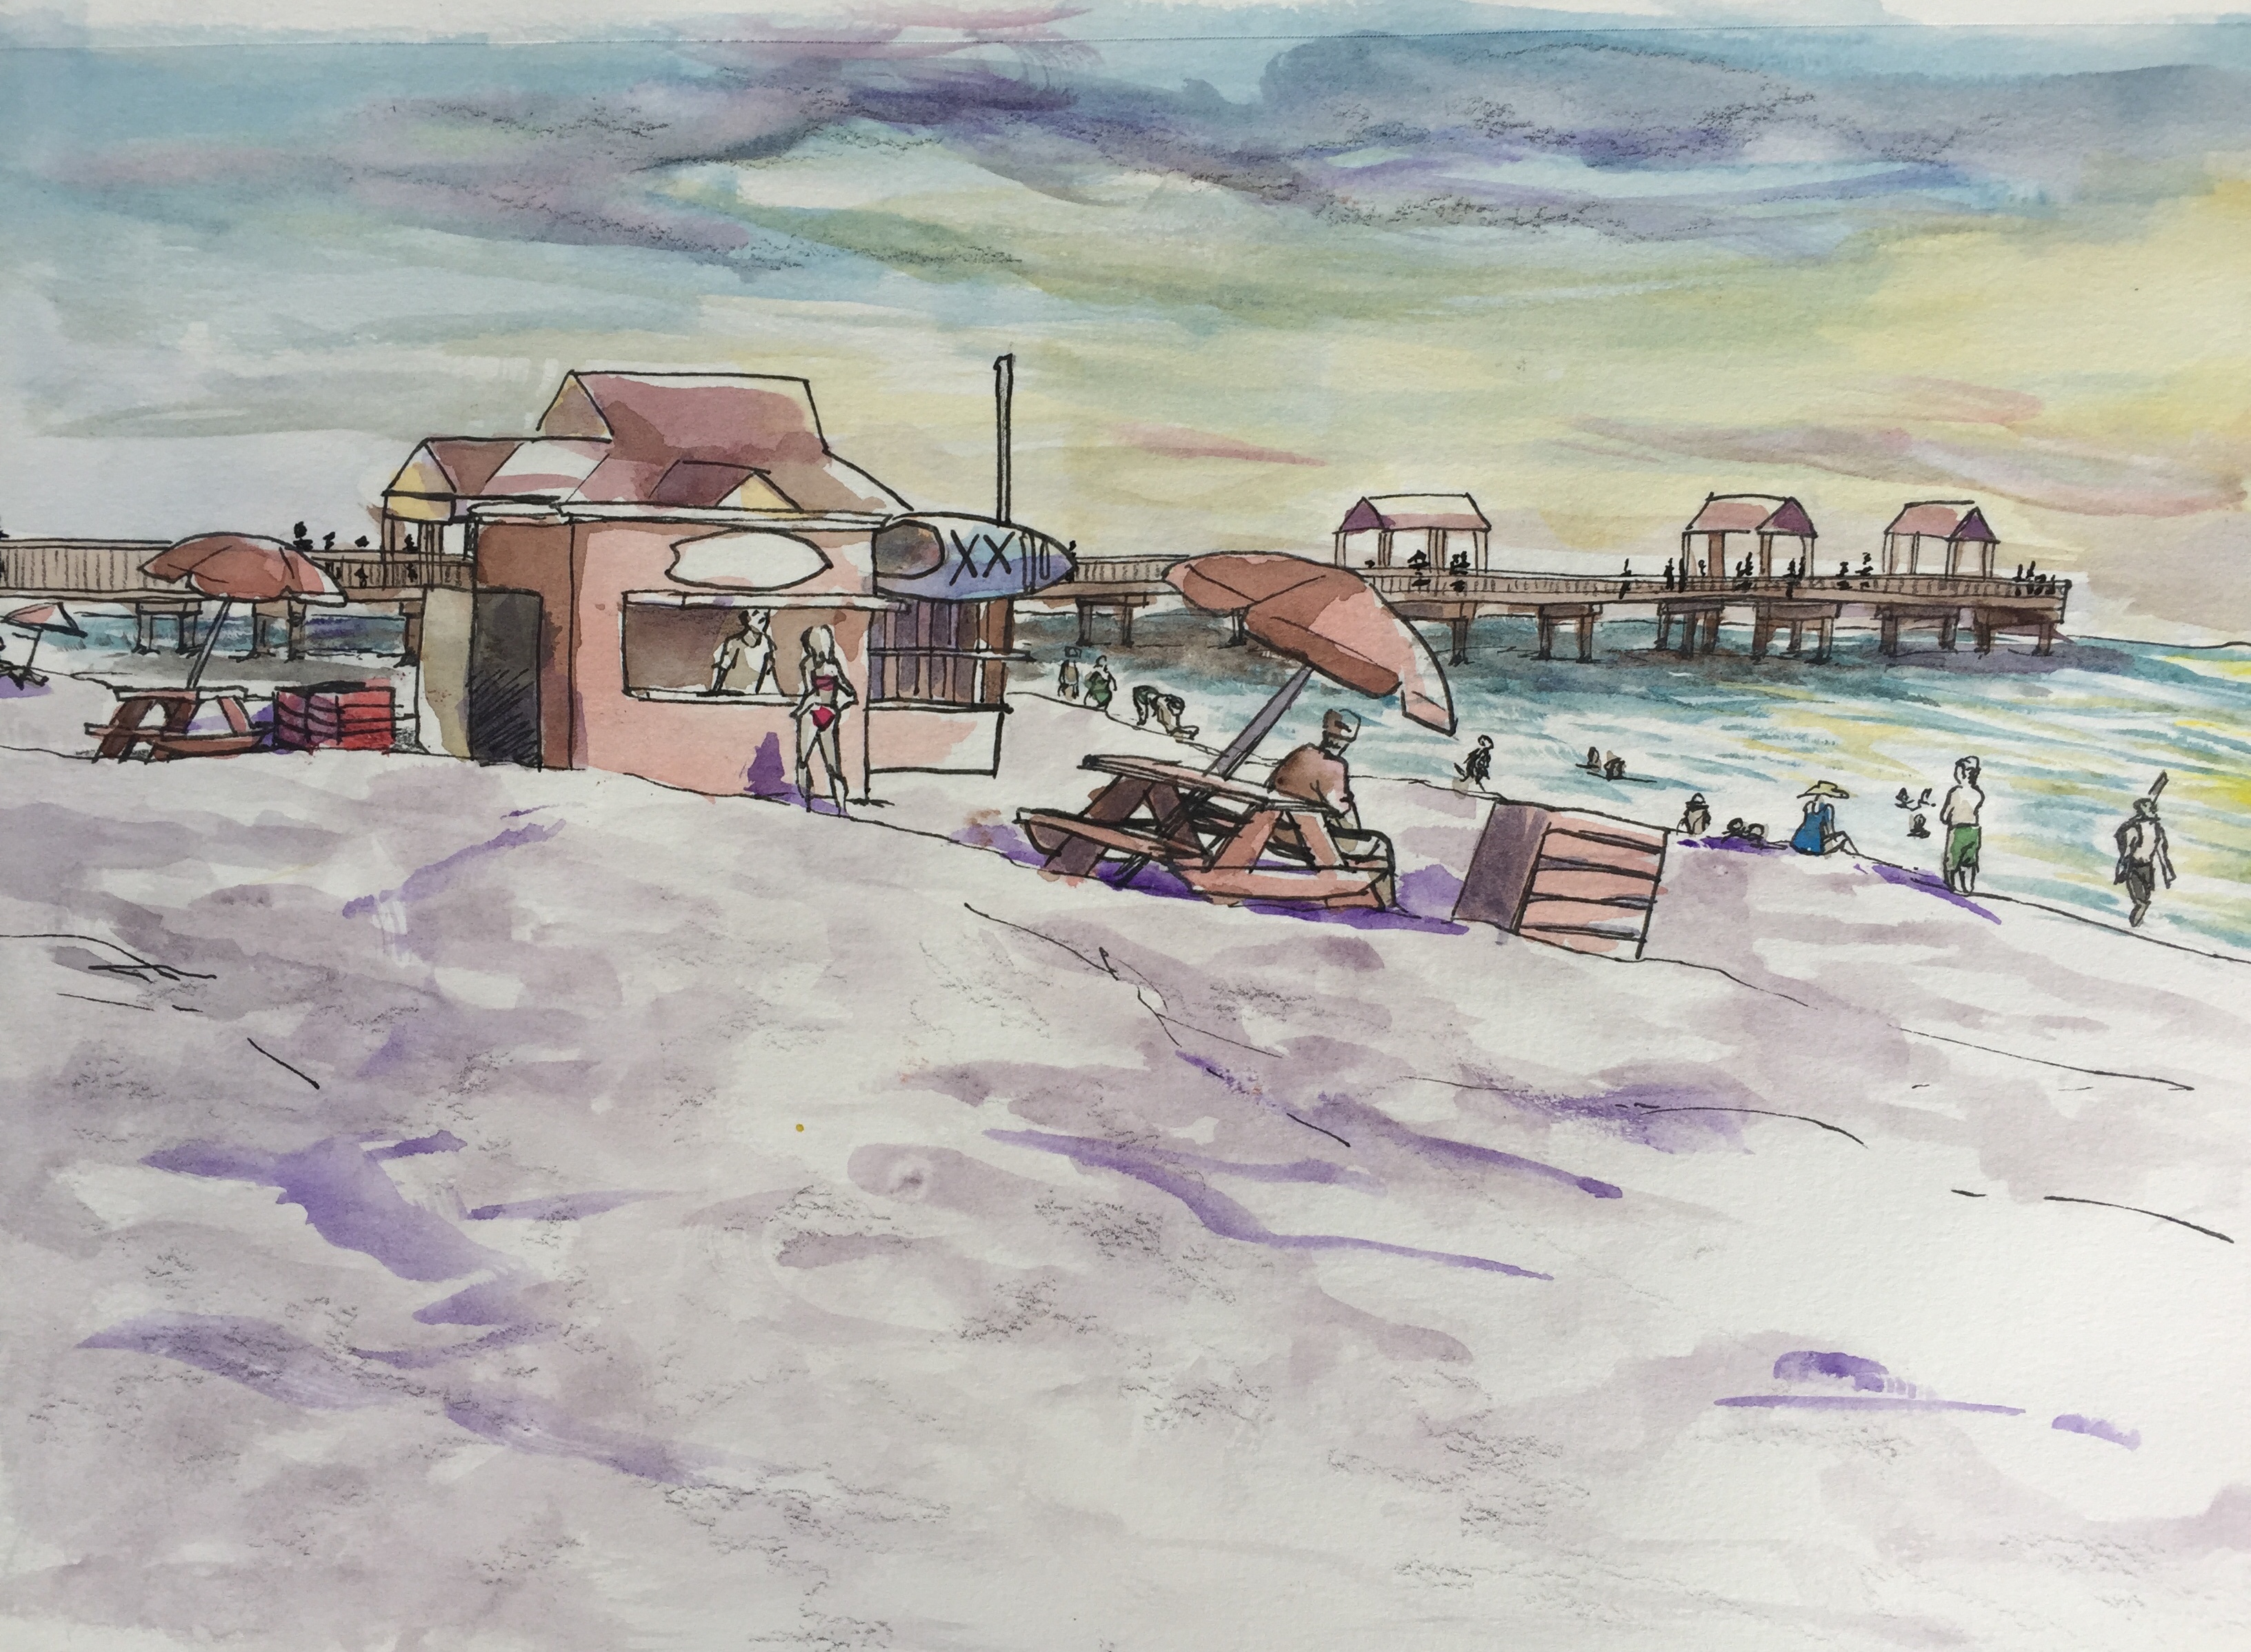 Urban sketch drawing Clearwater Beach at sunset